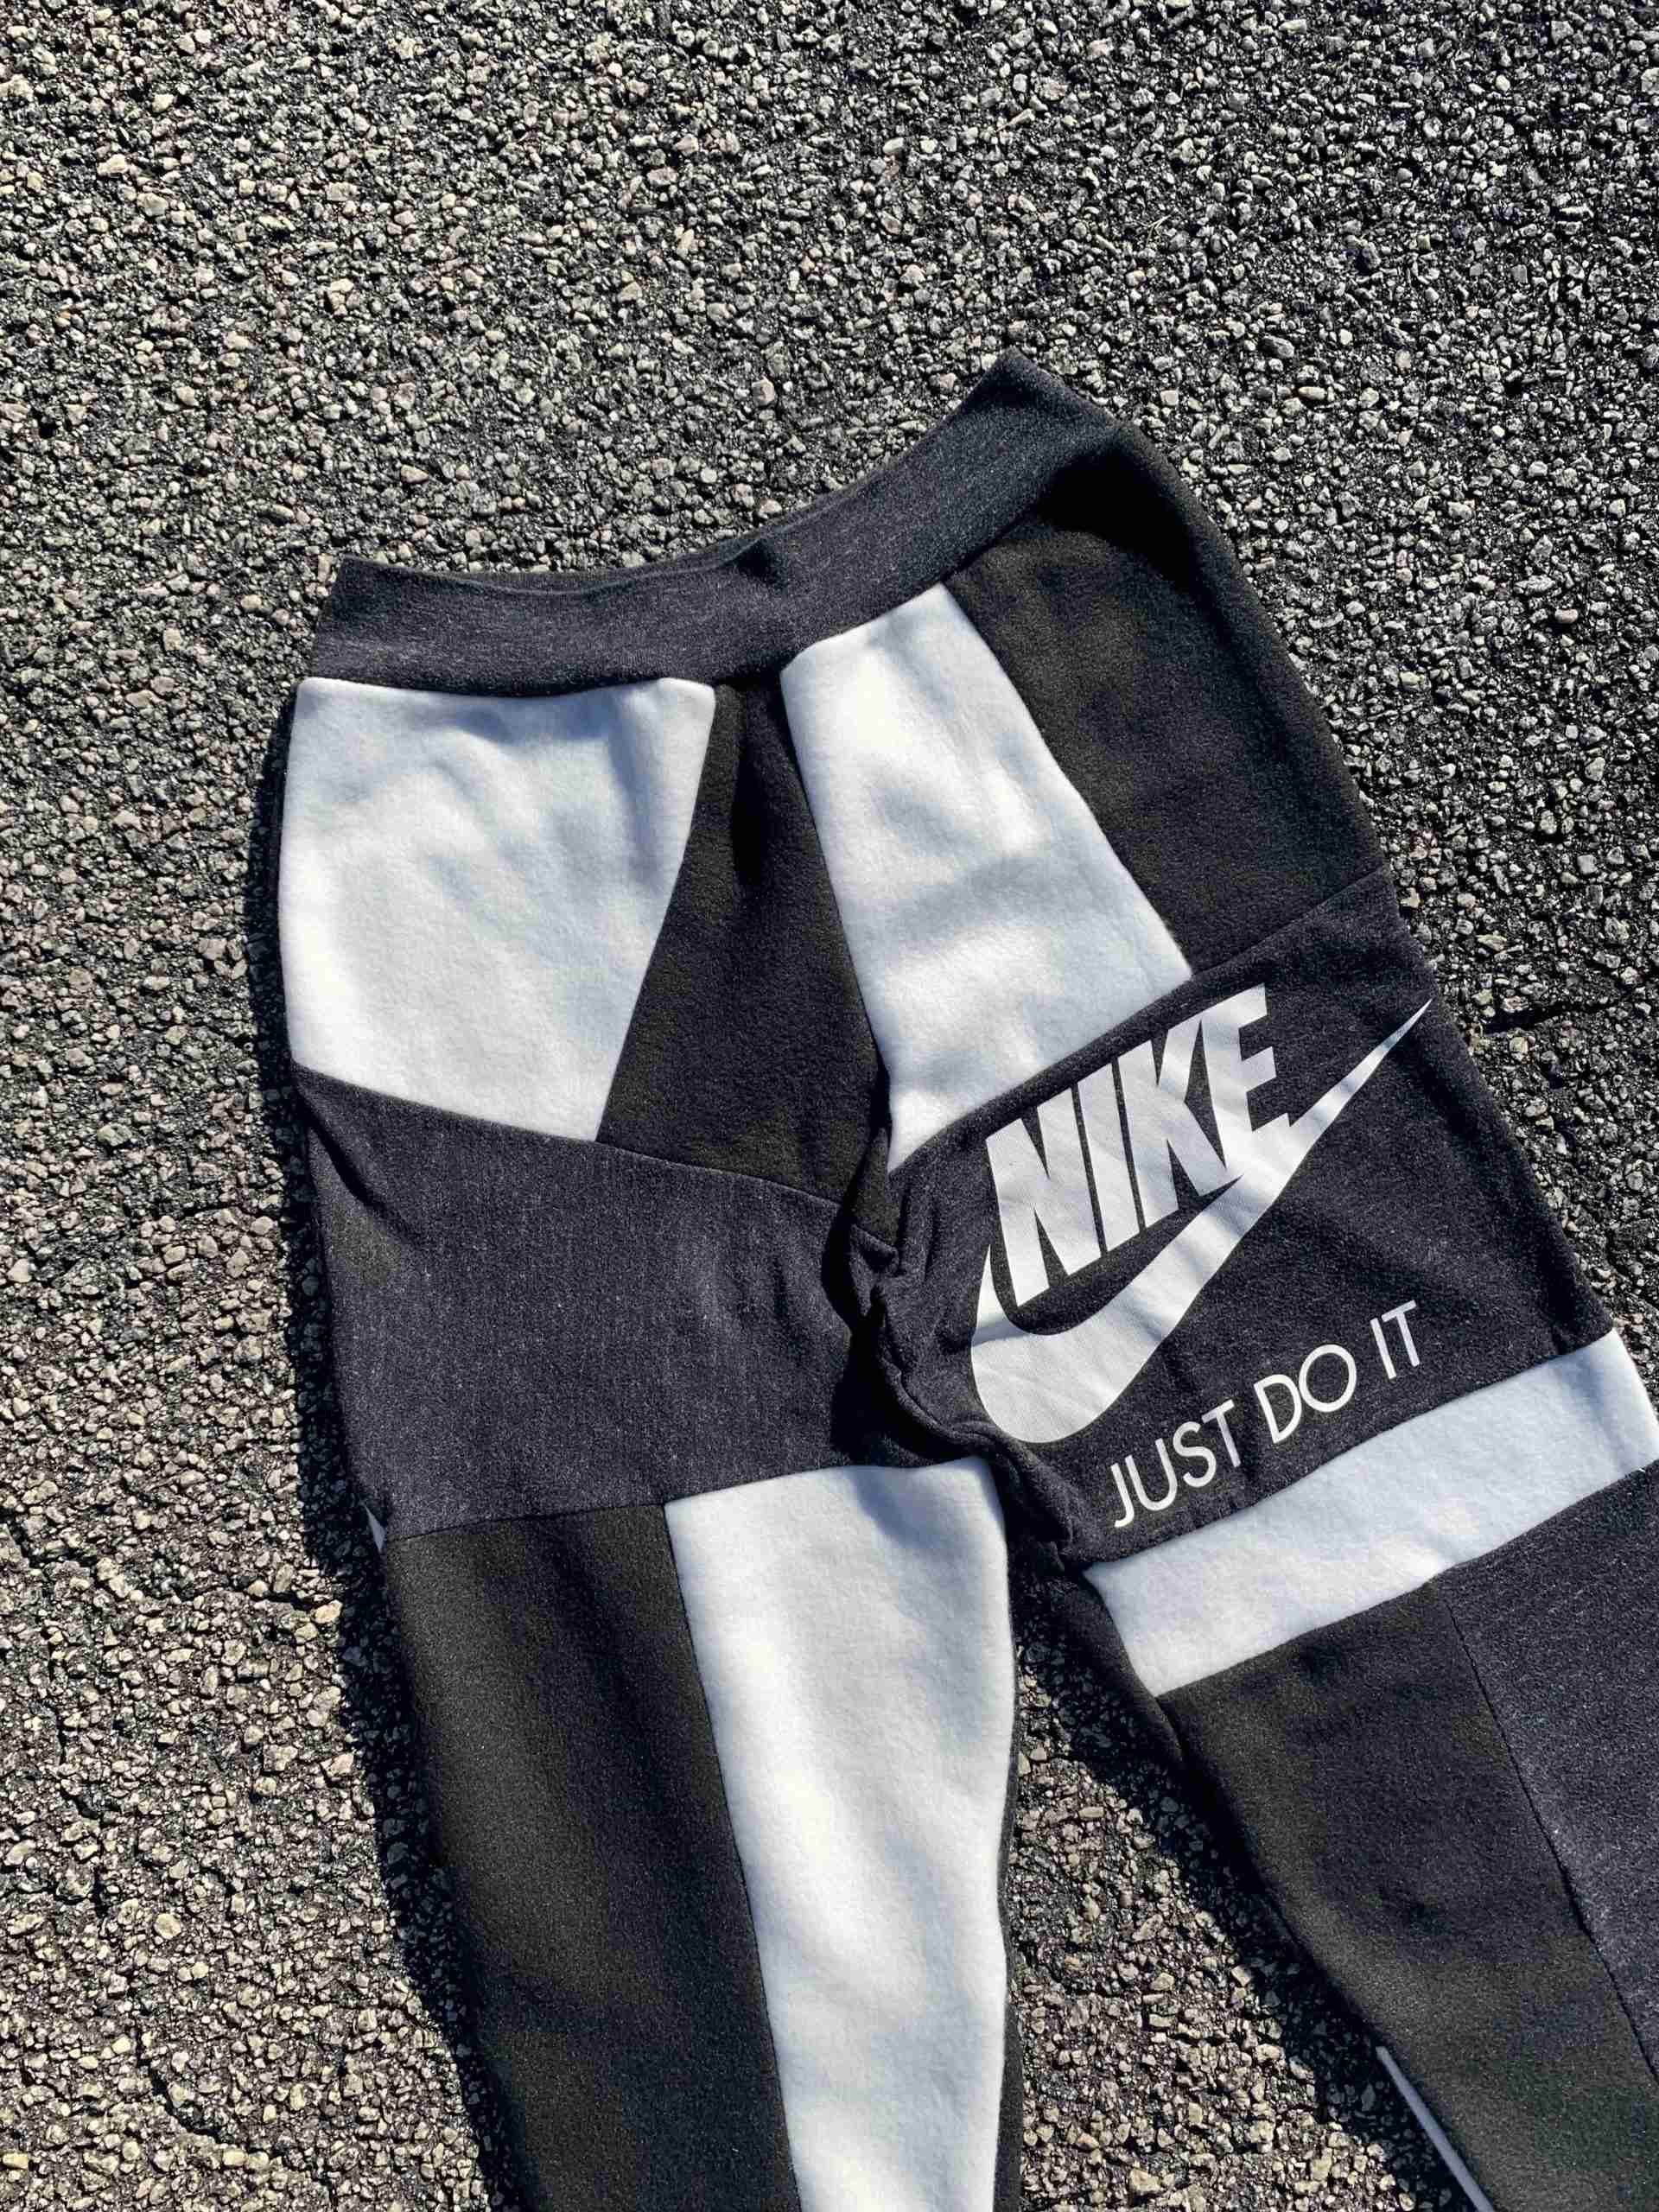 a pair of nike sweatpants laying on the ground.